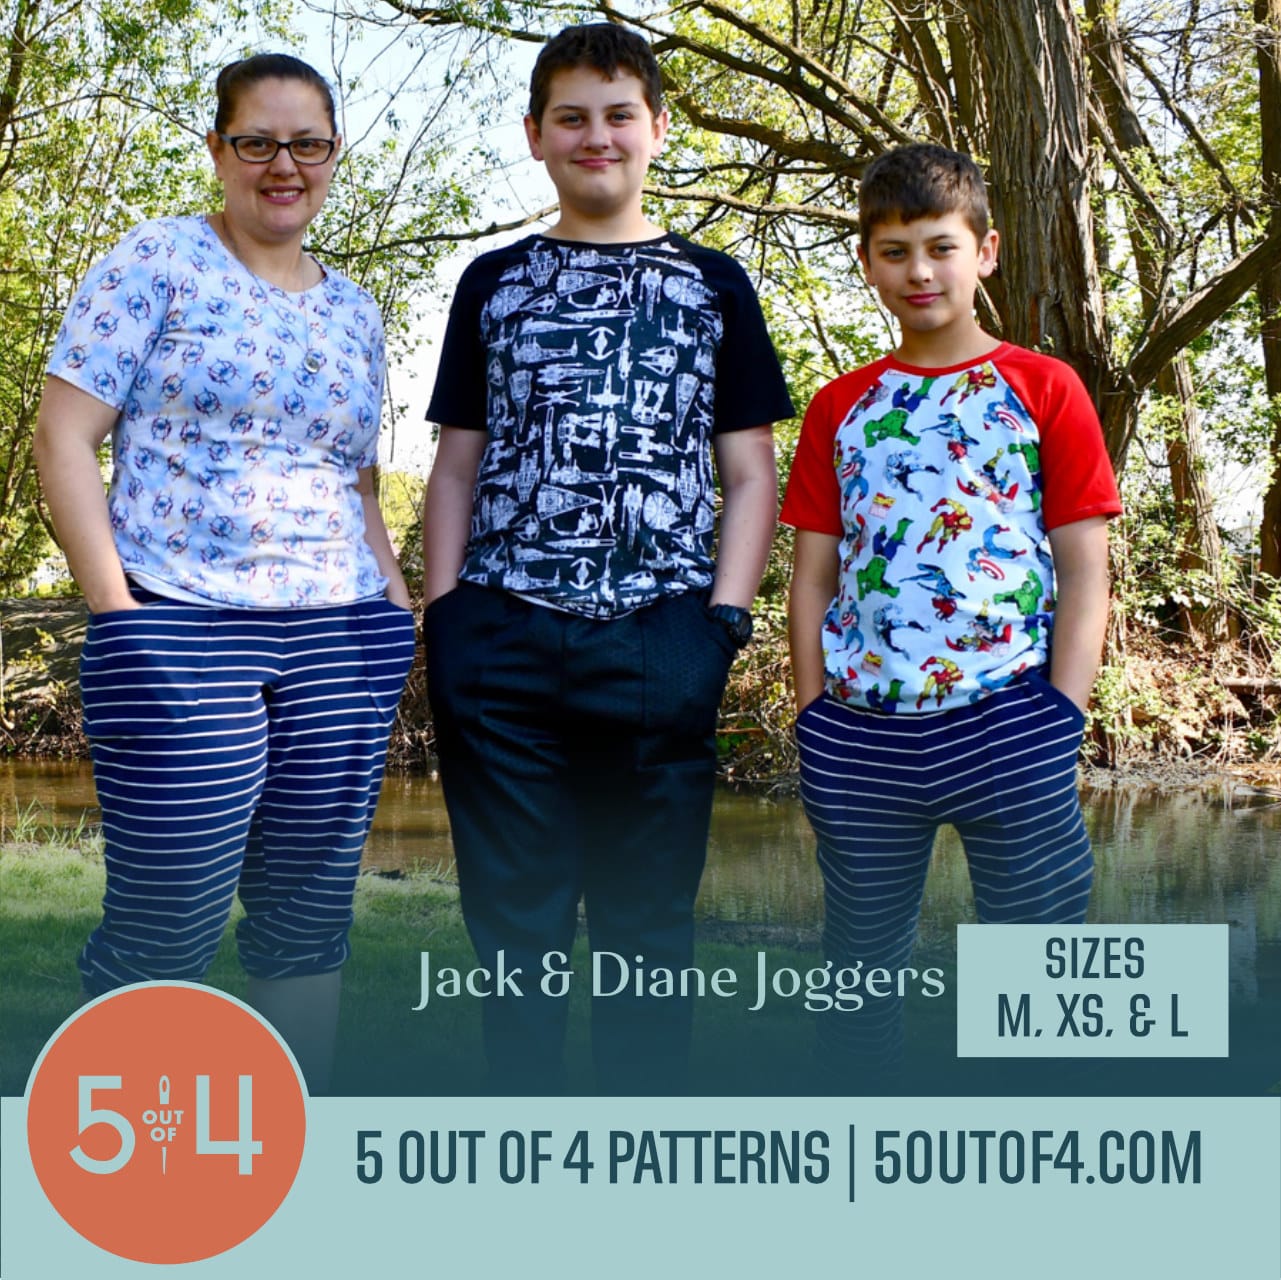 Jack and Diane Joggers Bundle - 5 out of 4 Patterns